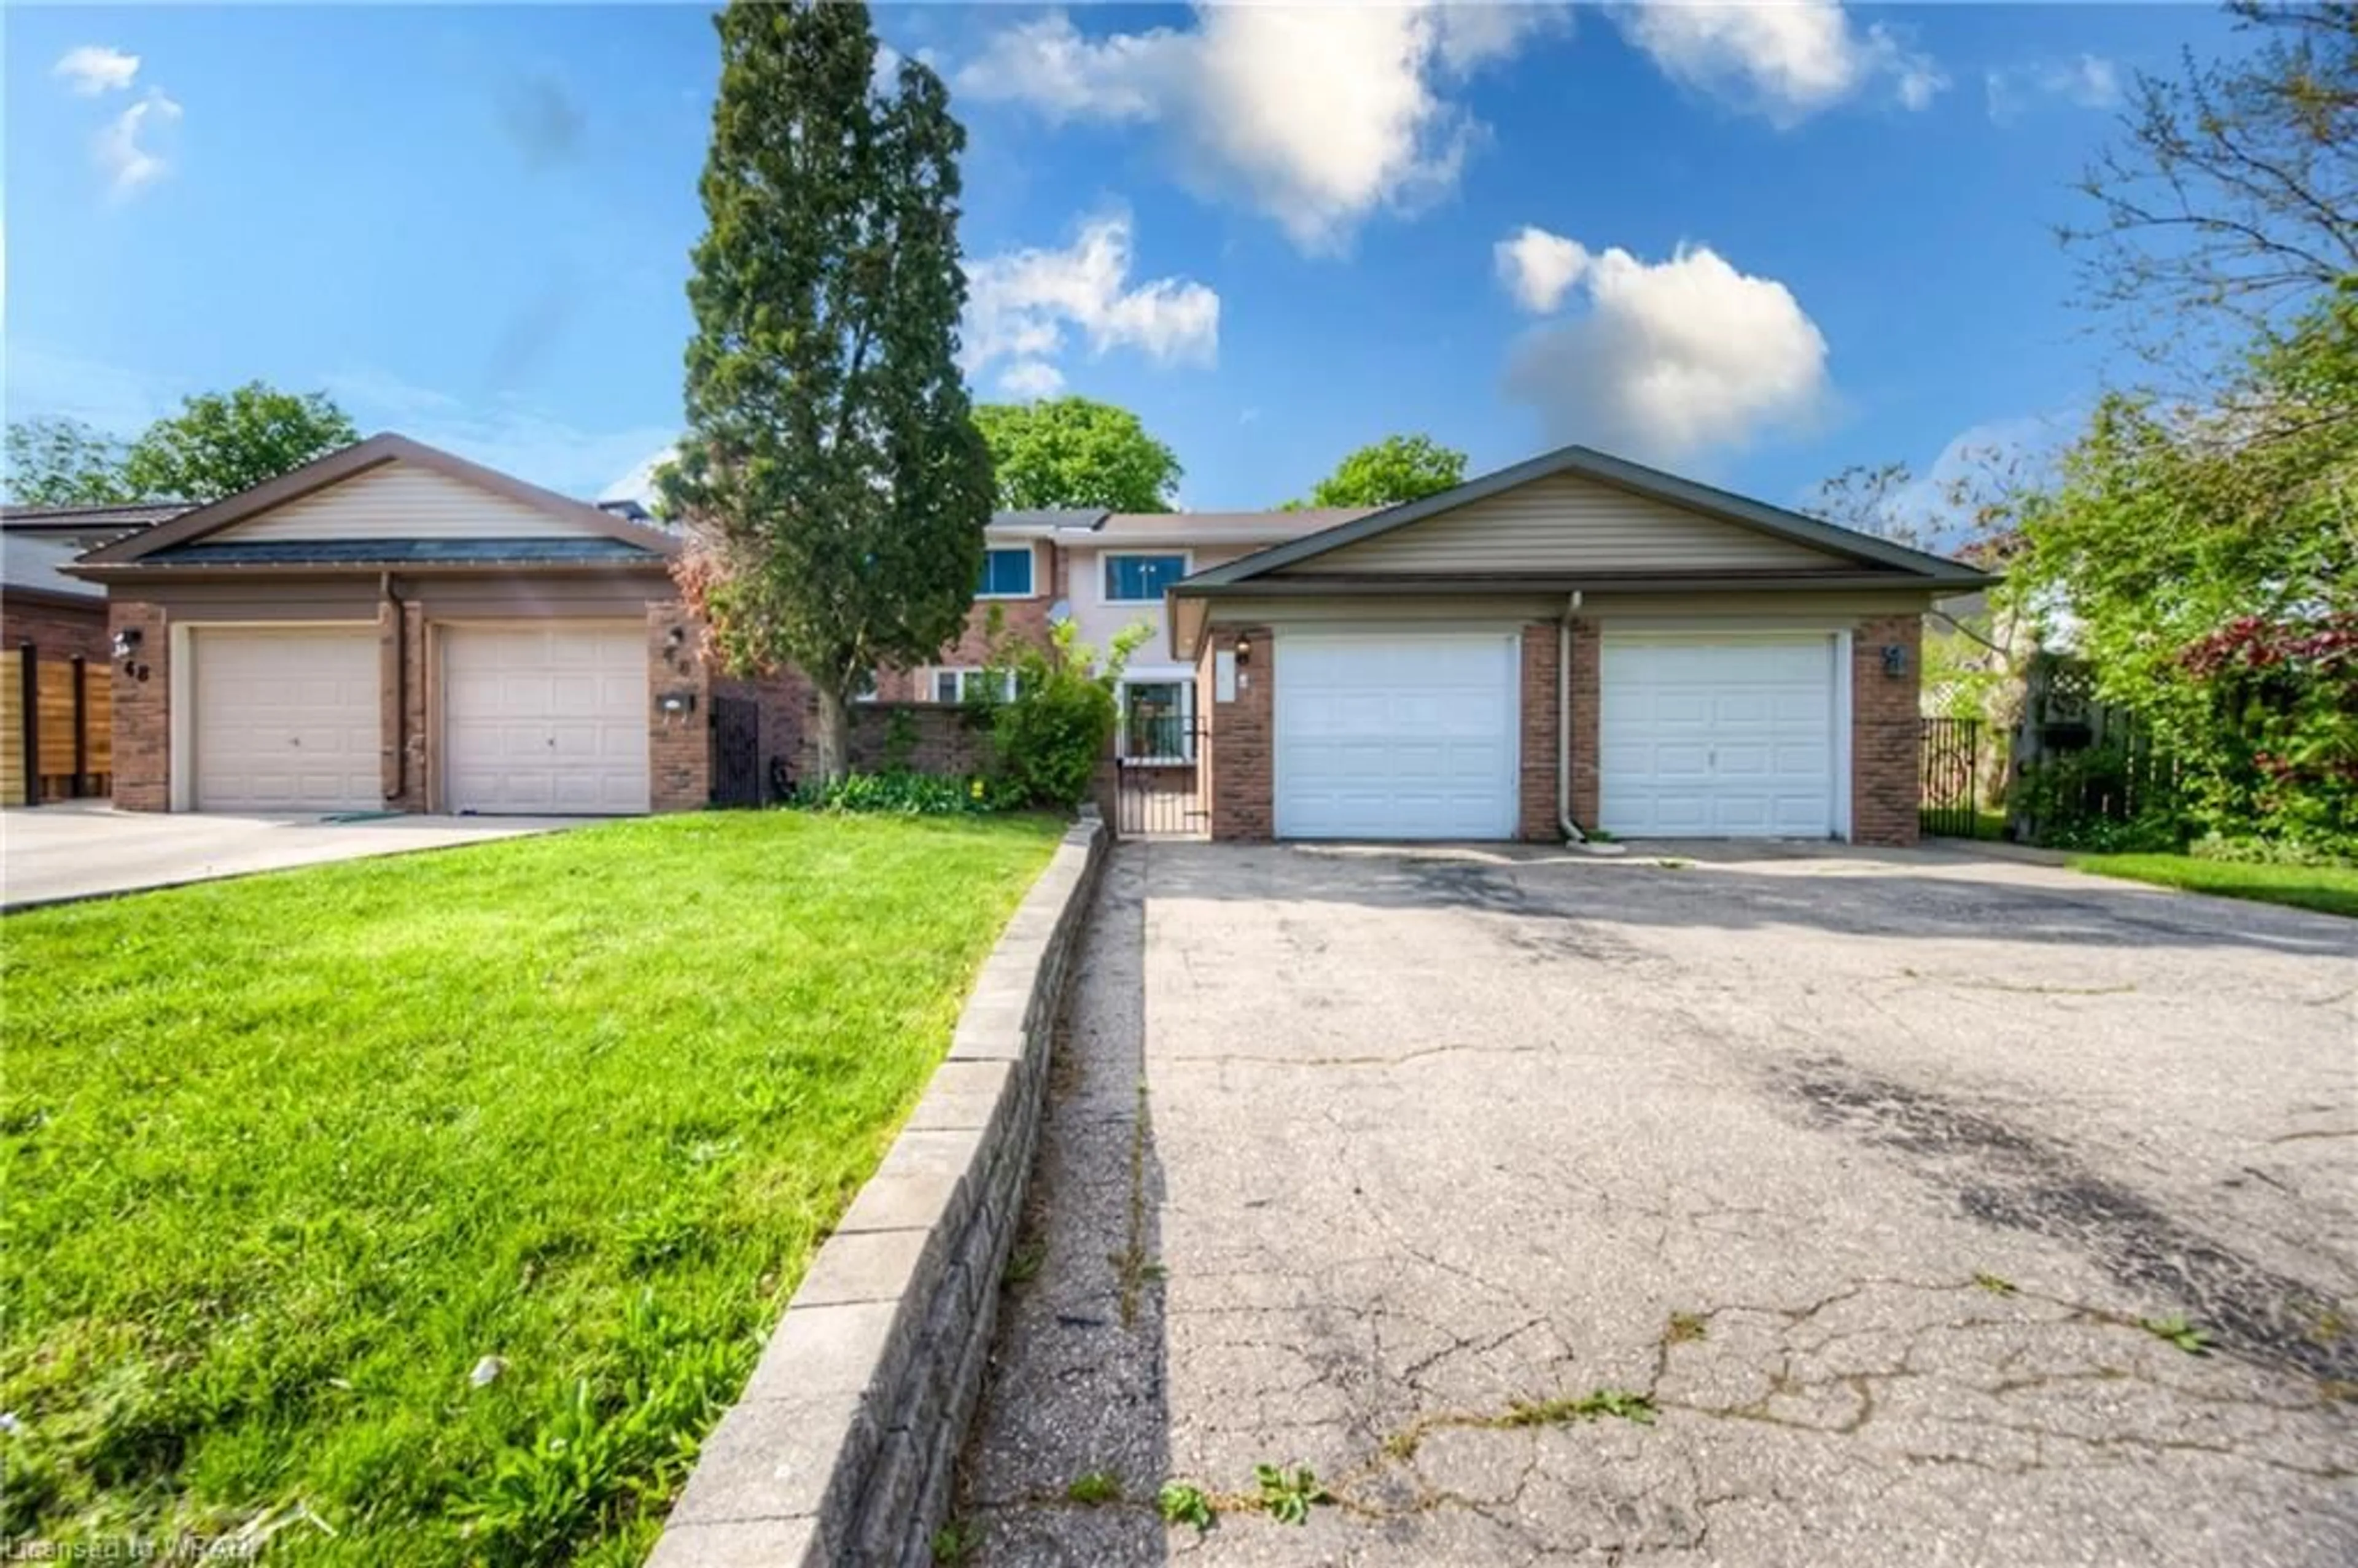 Frontside or backside of a home for 44 Ralgreen Cres, Kitchener Ontario N2M 1T9